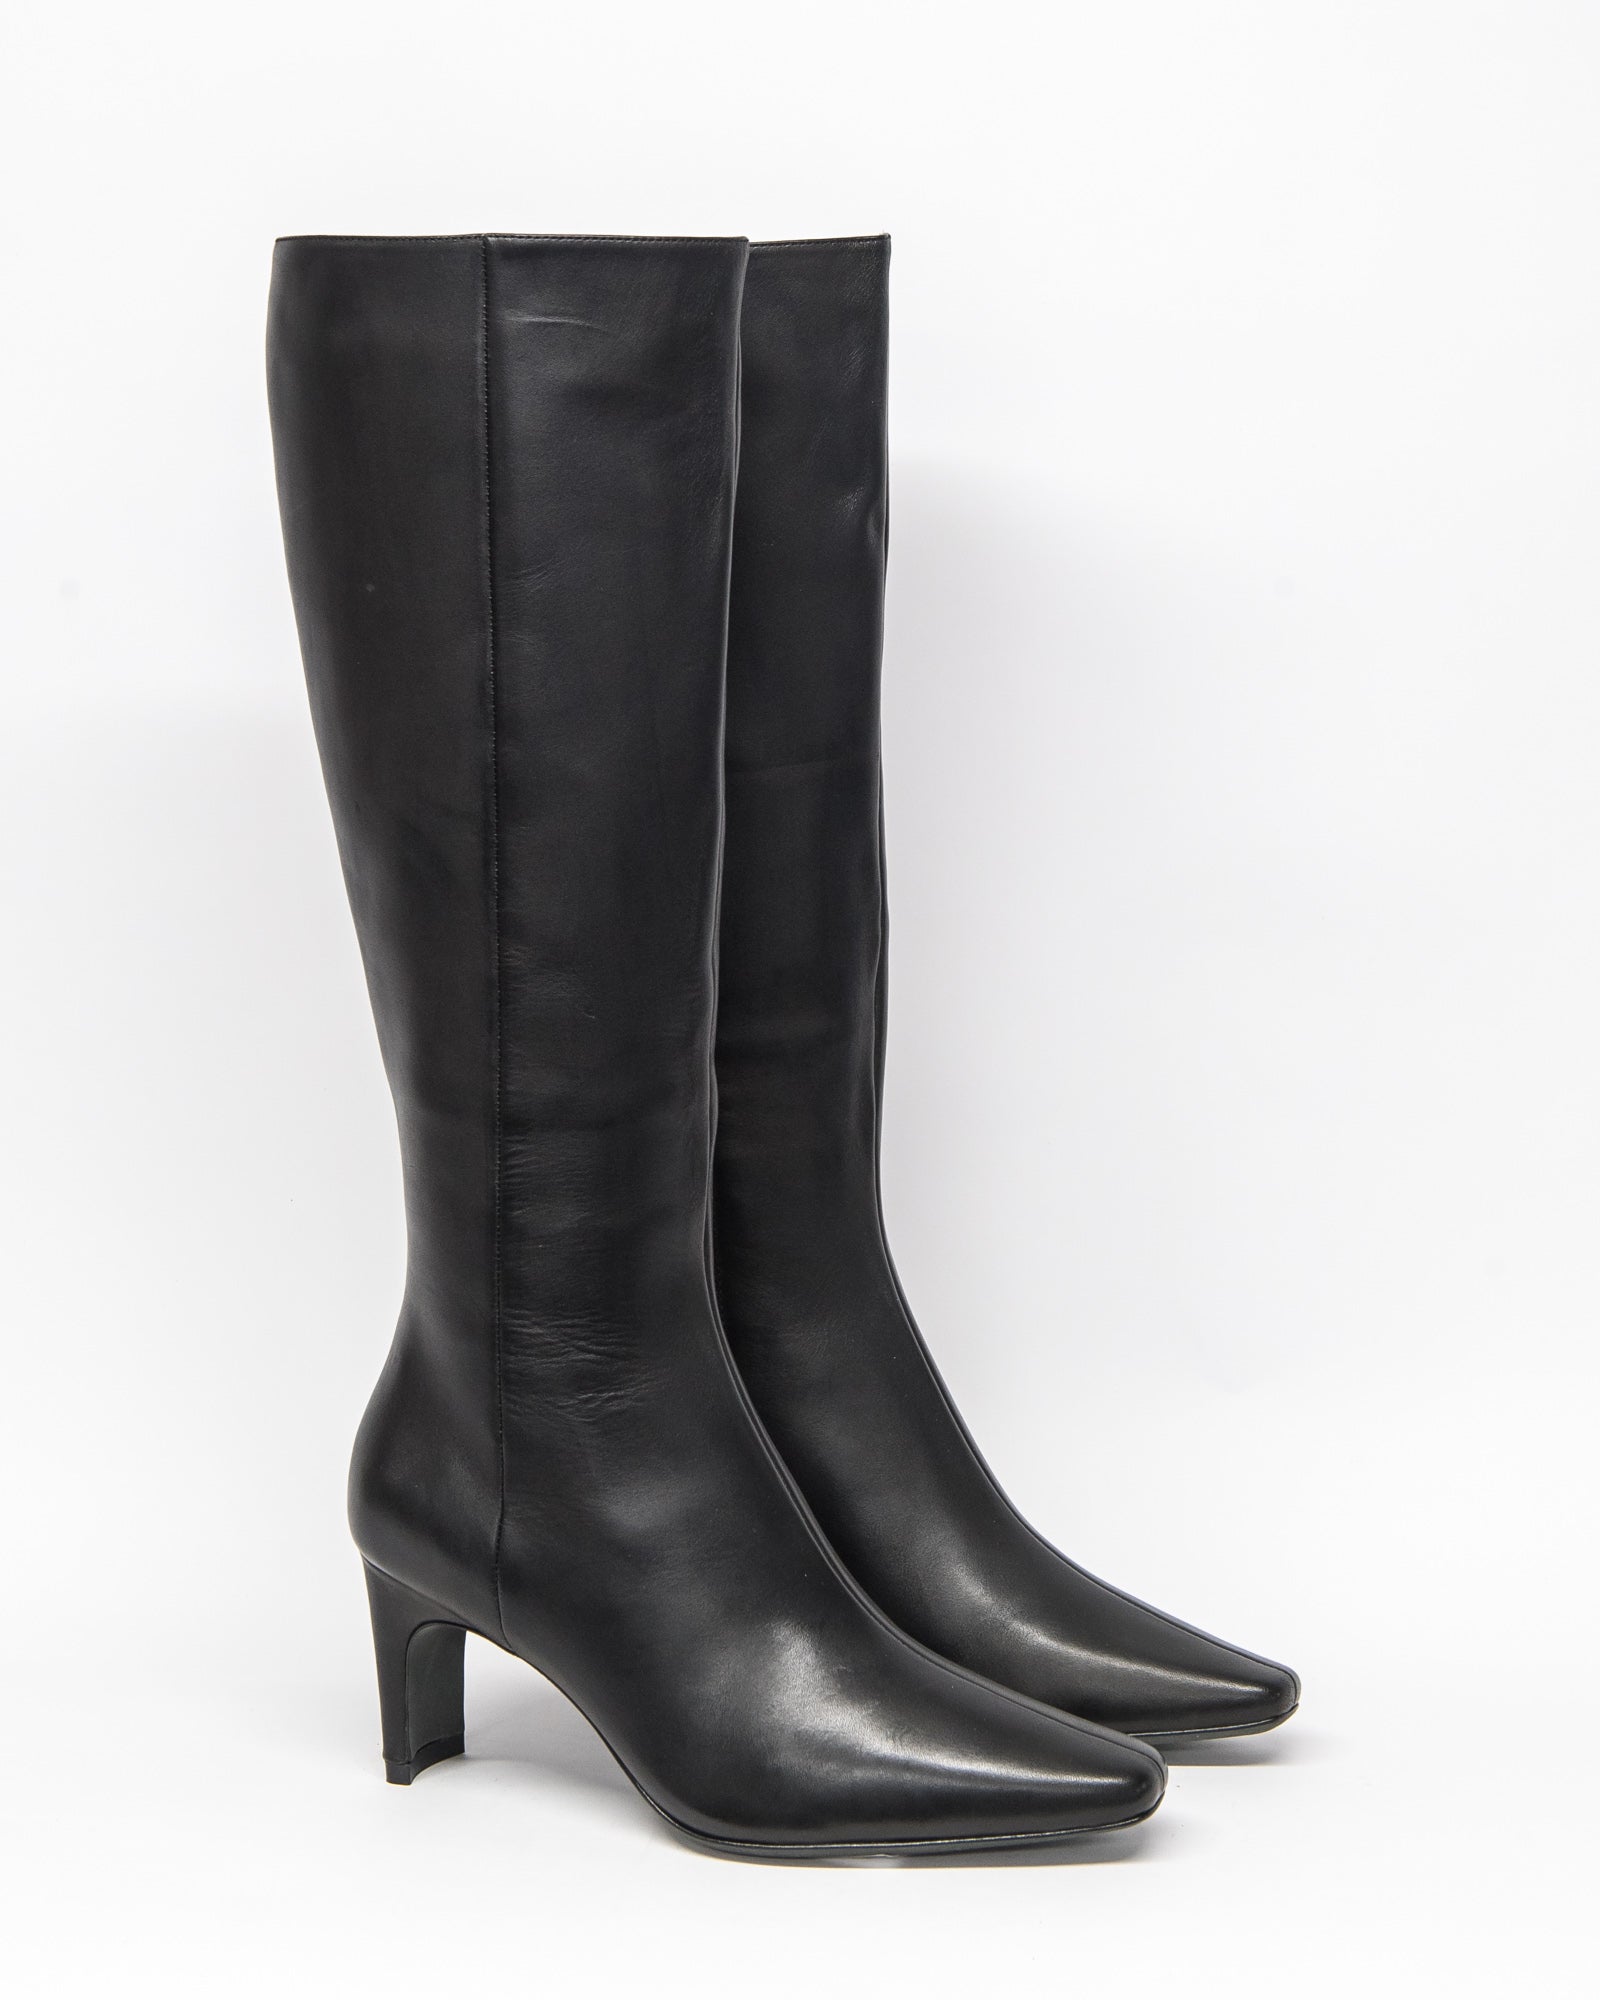 steam boot - black leather